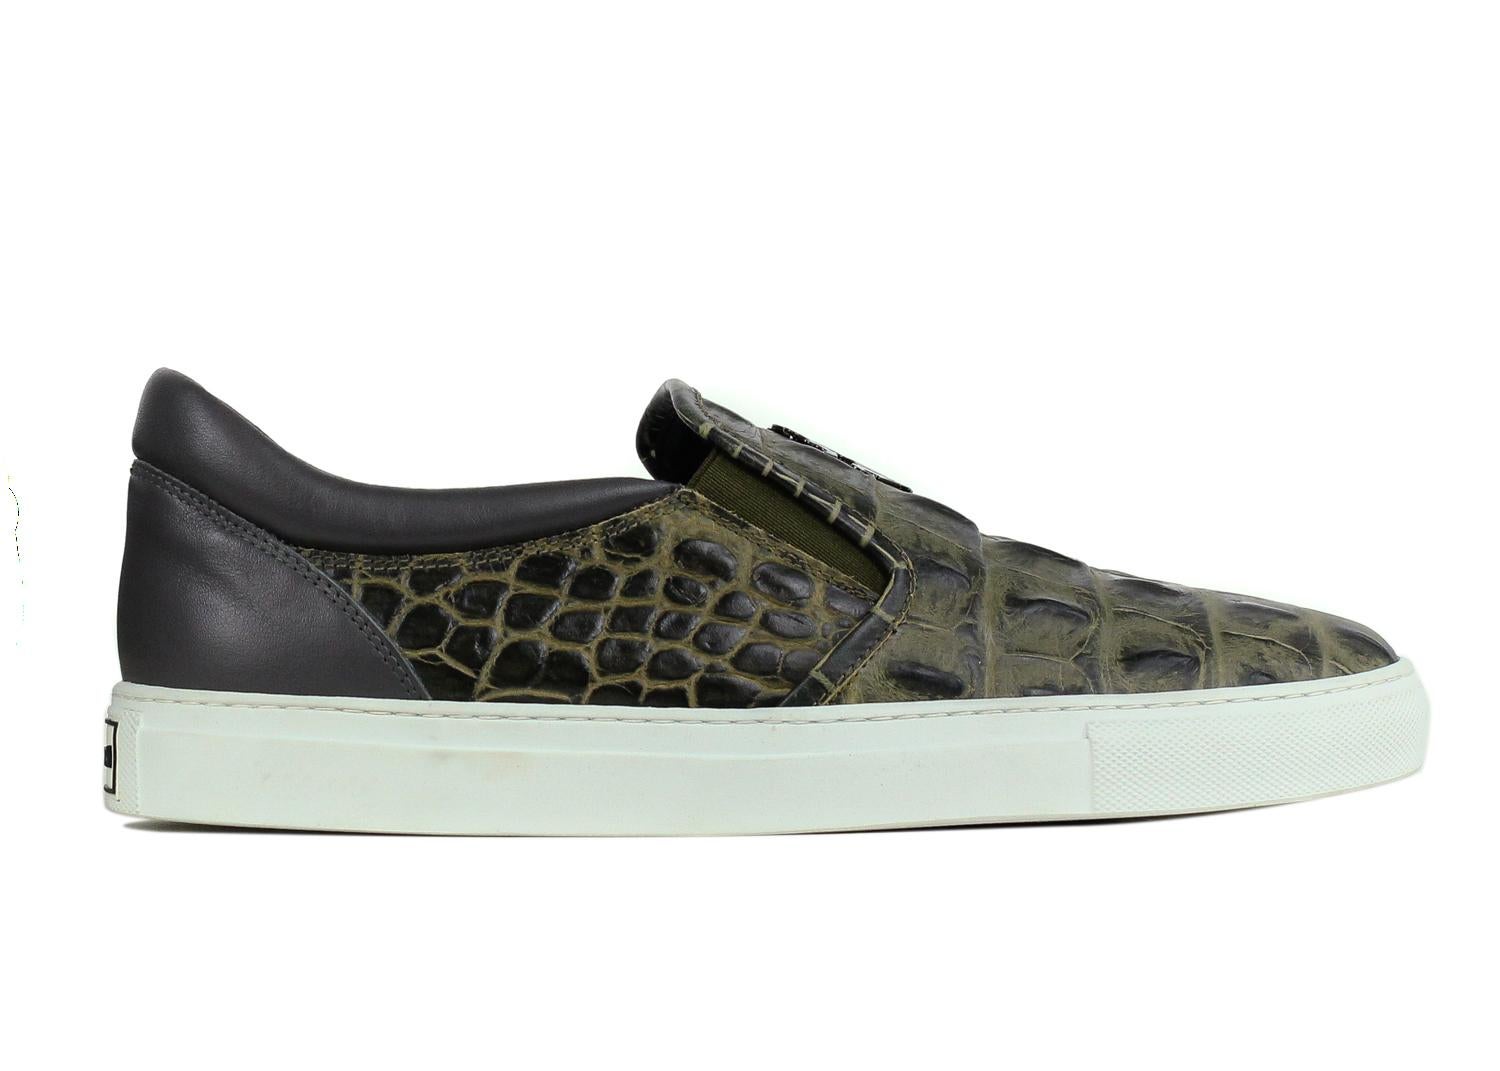 Roberto Cavalli Olive Green Croc Embossed Leather Slip Ons In New Condition For Sale In Brooklyn, NY